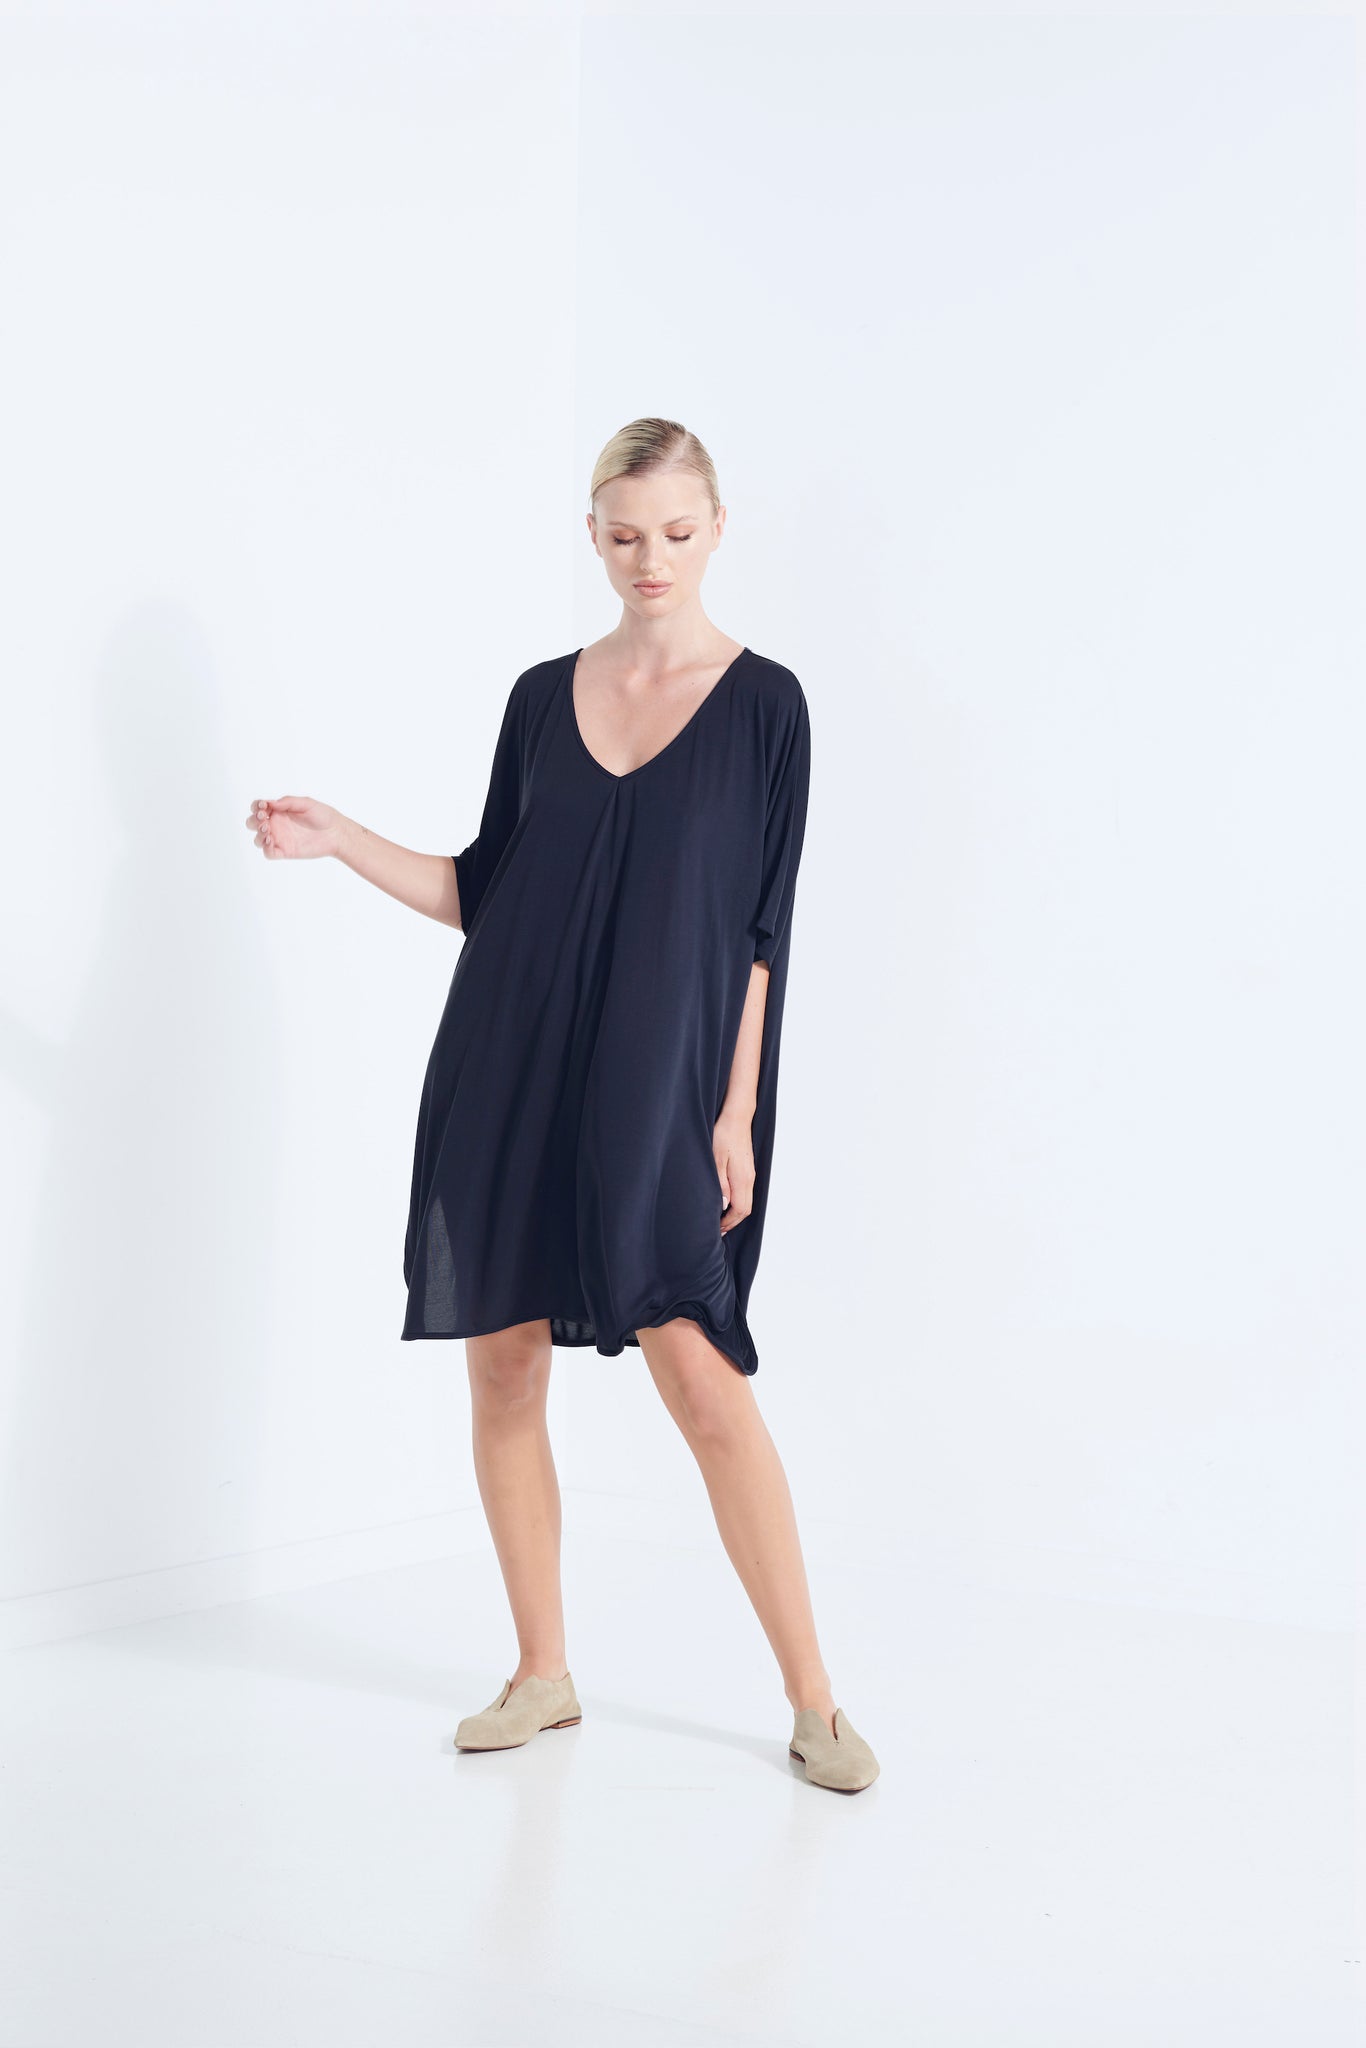 THEMIS DRESS LONGLINE T-SHIRT BEECHWOOD MODAL STRETCH WITH REMOVABLE TIE DARK WASHED BLACK FRONT VIEW